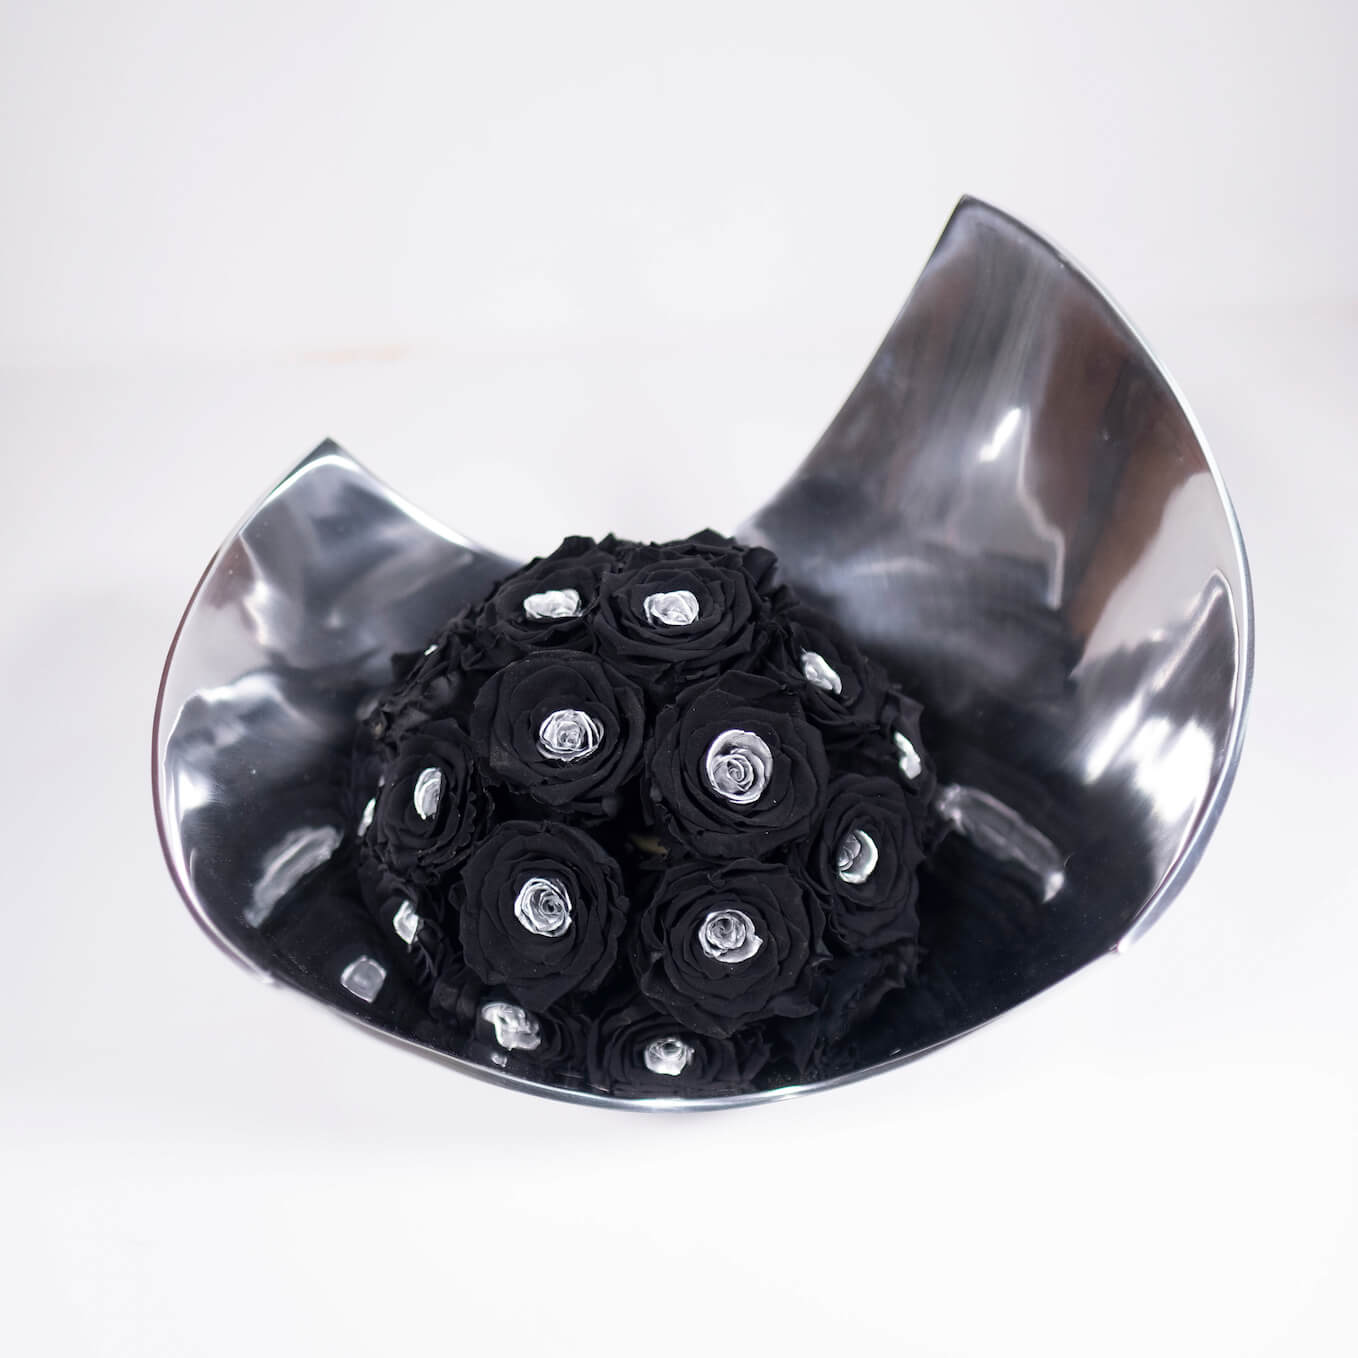 ASYMMETRIC CURVY SILVER LARGE VASE WITH LARGE BLACK PRESERVED FLOWERS - LUNA COLLECTION